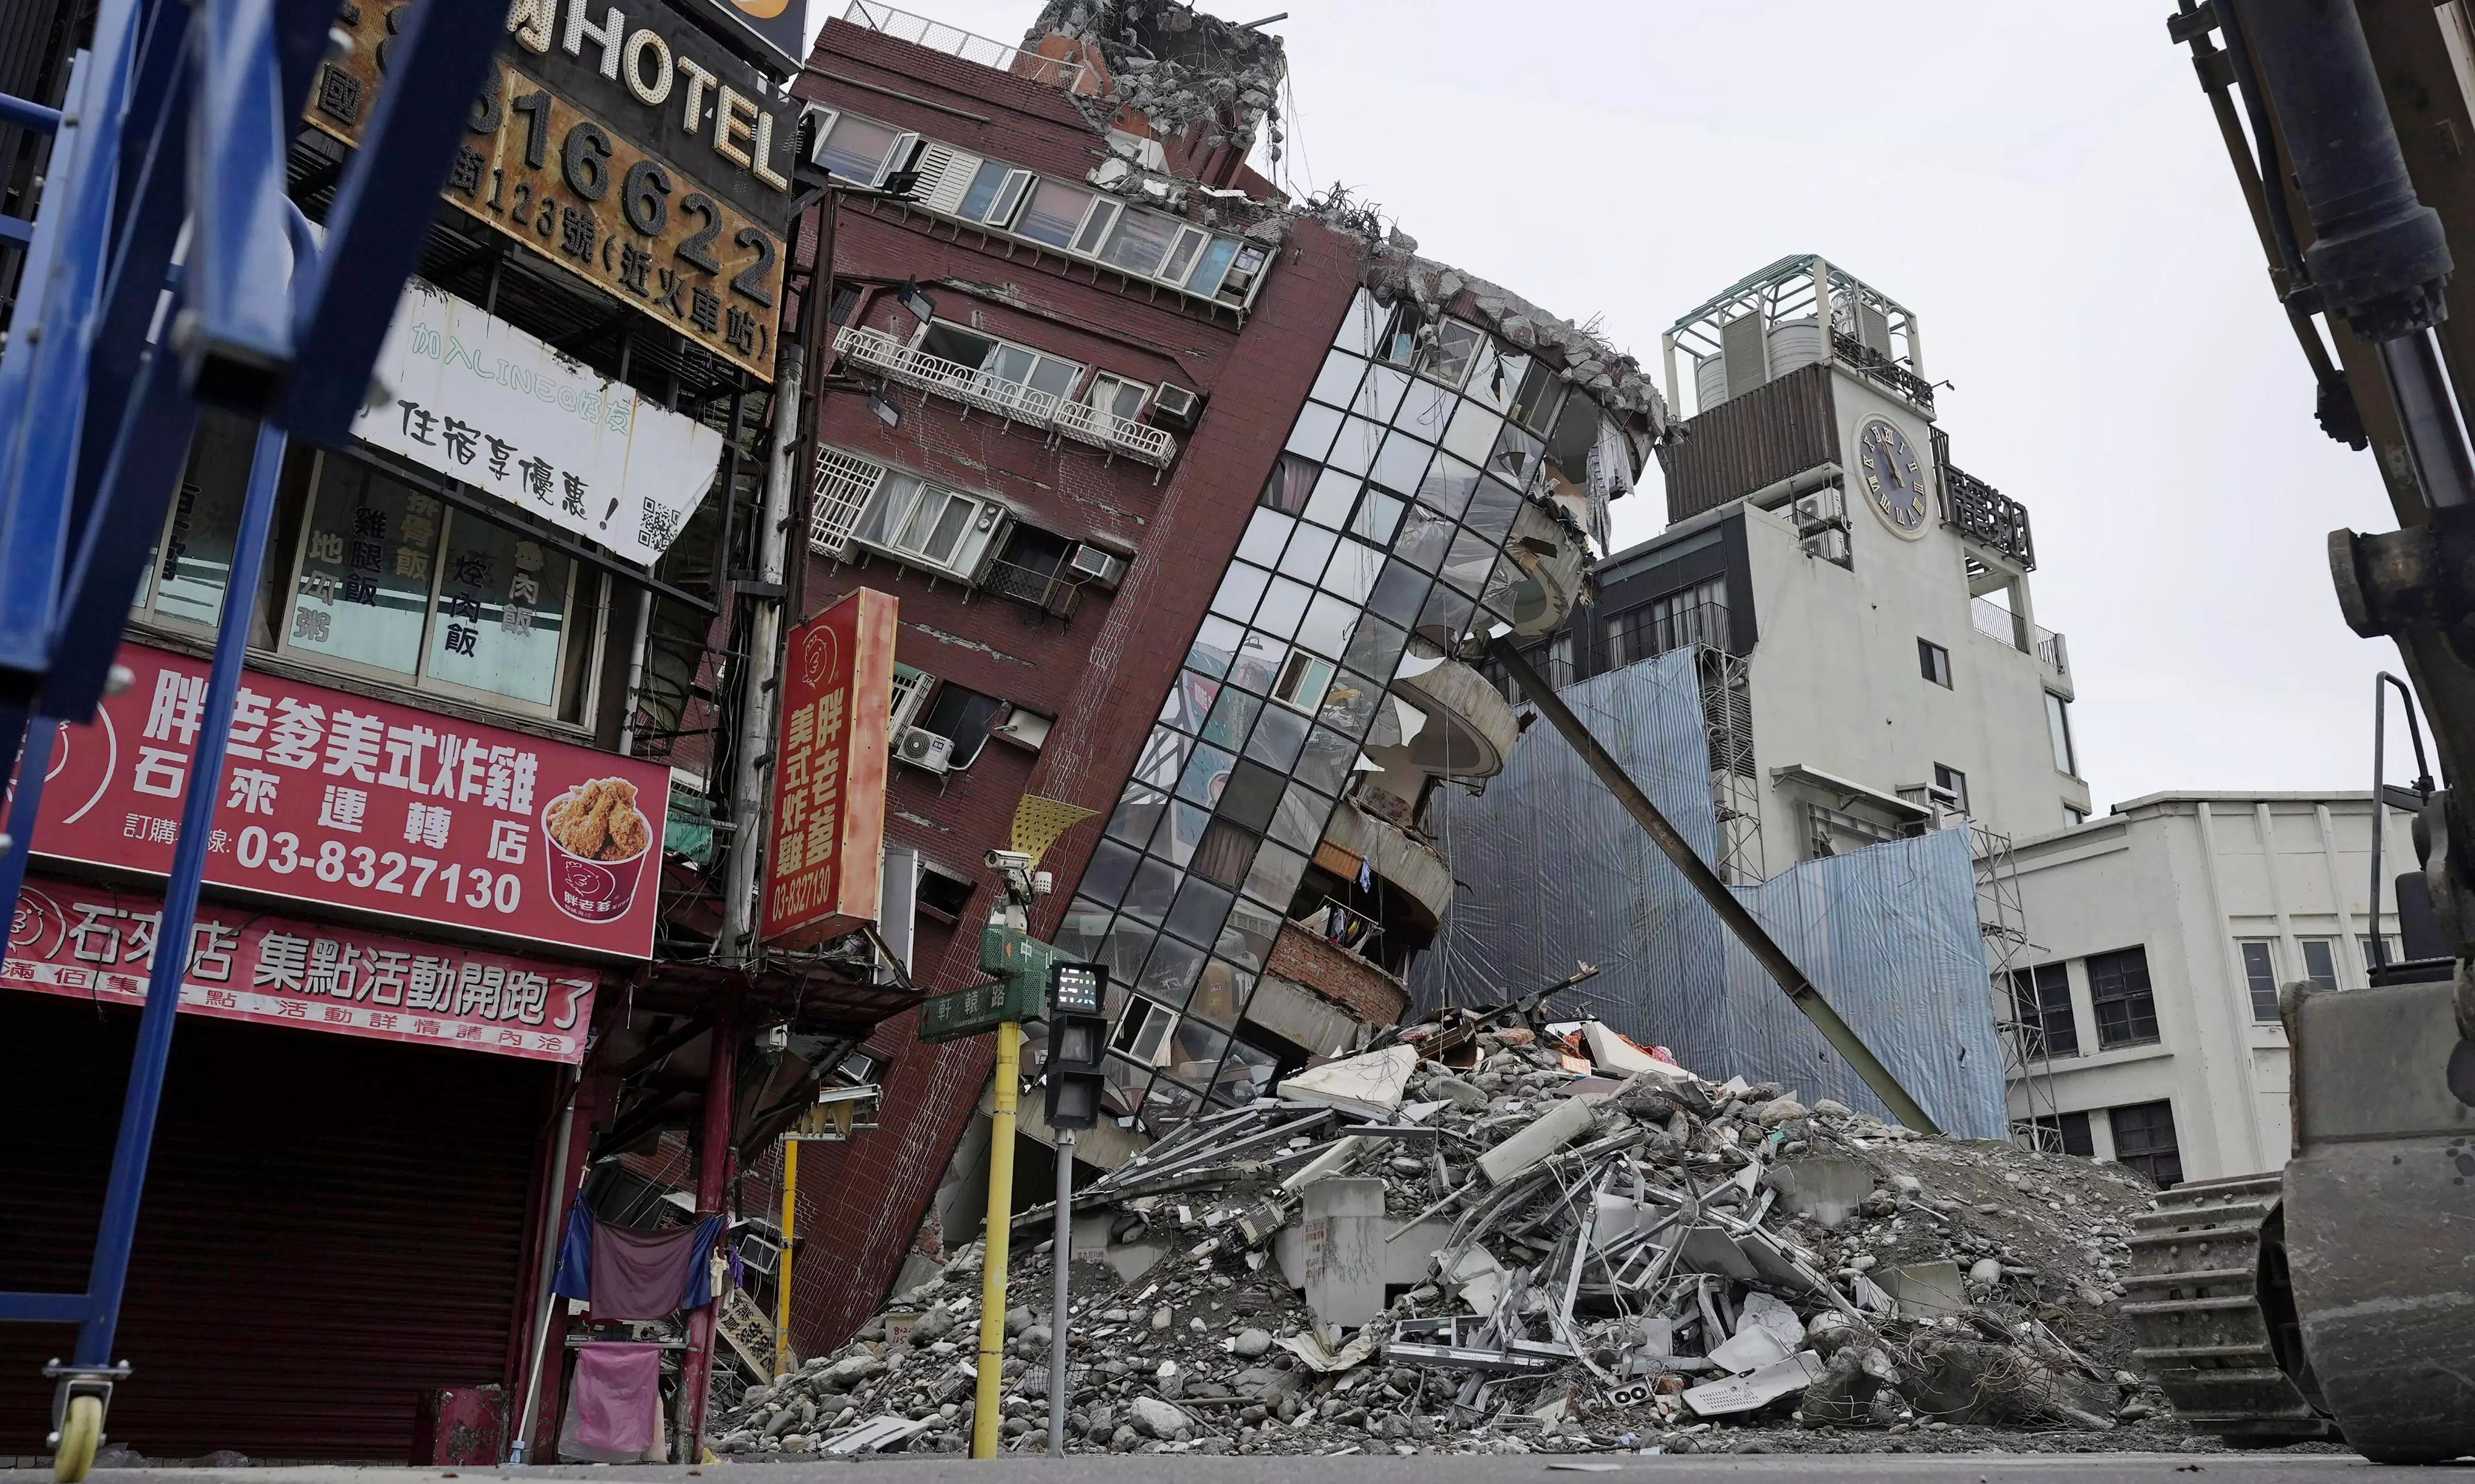 Aftershocks pause leaning building demolition in Taiwan; death toll climbs to 13